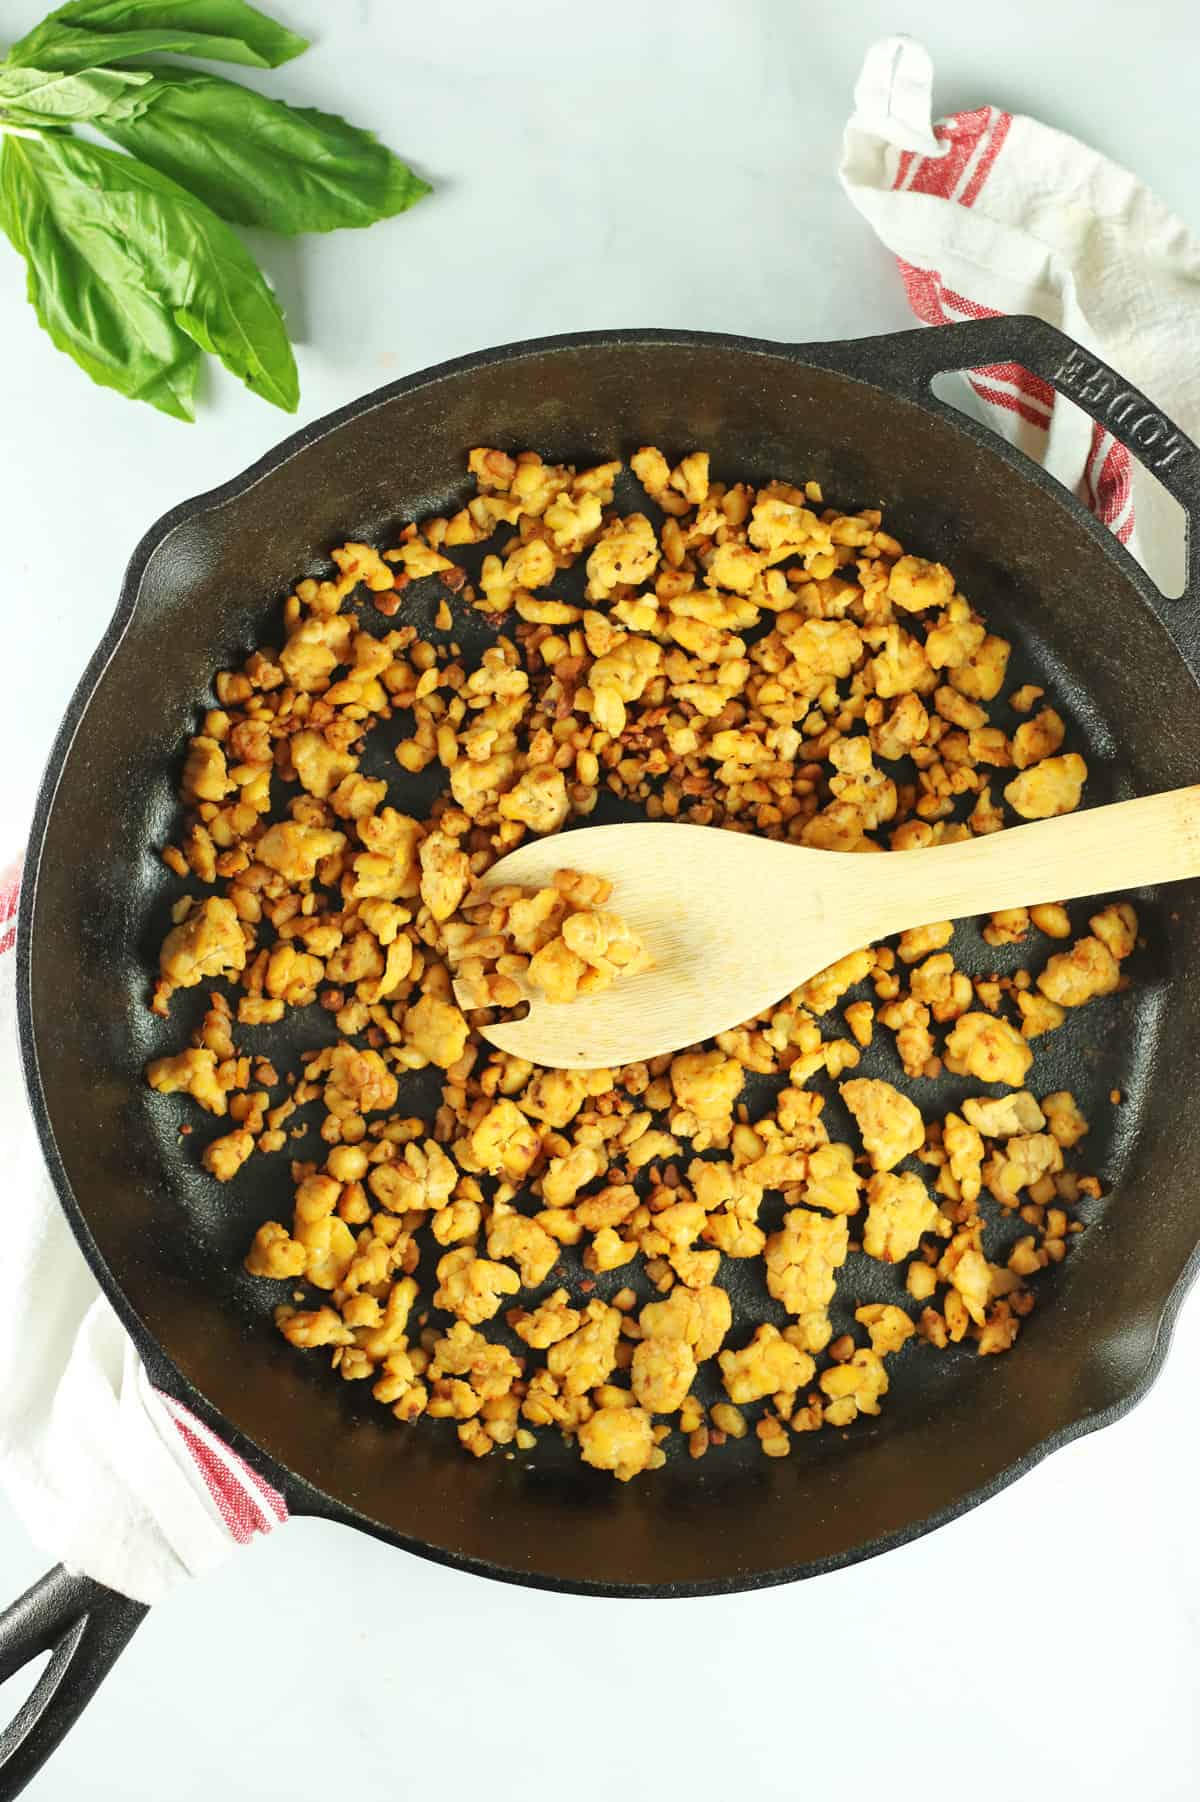 vegan meatless crumbles made with tempeh in black skillet wit wooden spoon.